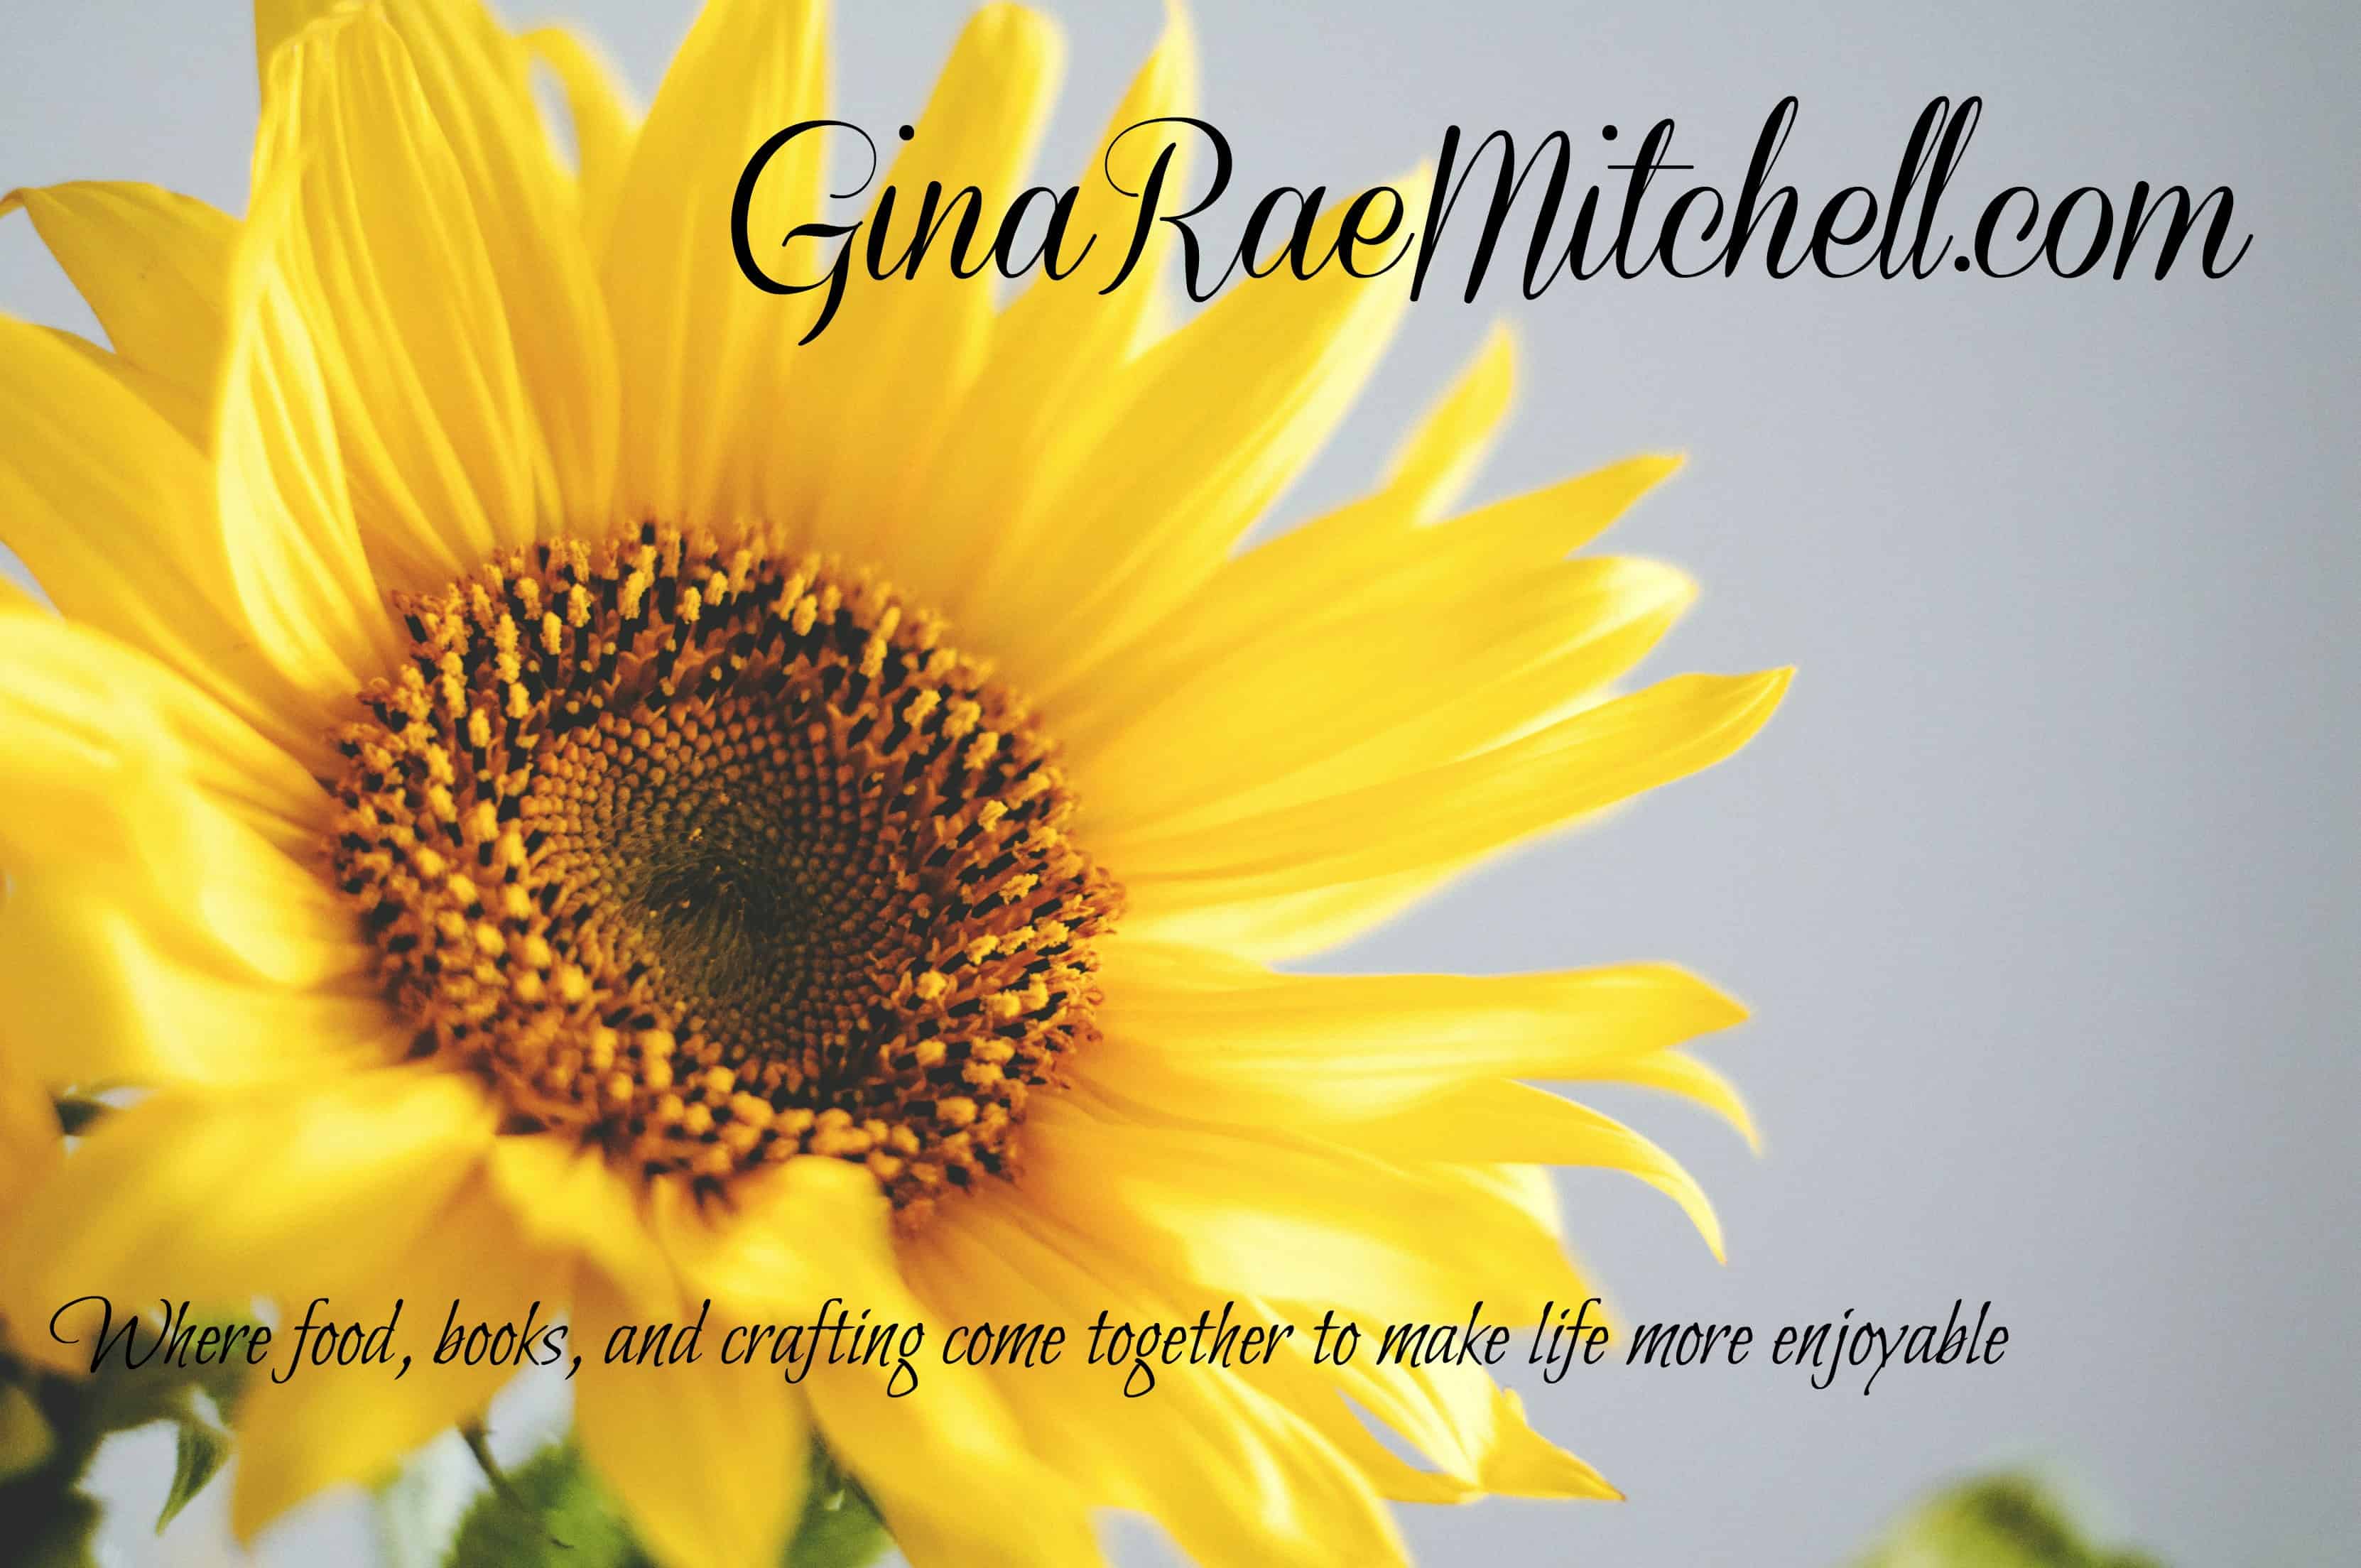 August 12 - 2018 newsletter yellow sunflower on blue sky background with phrase GinaRaeMitchell.com Where food, books, and crafting come together to make life more enjoyable